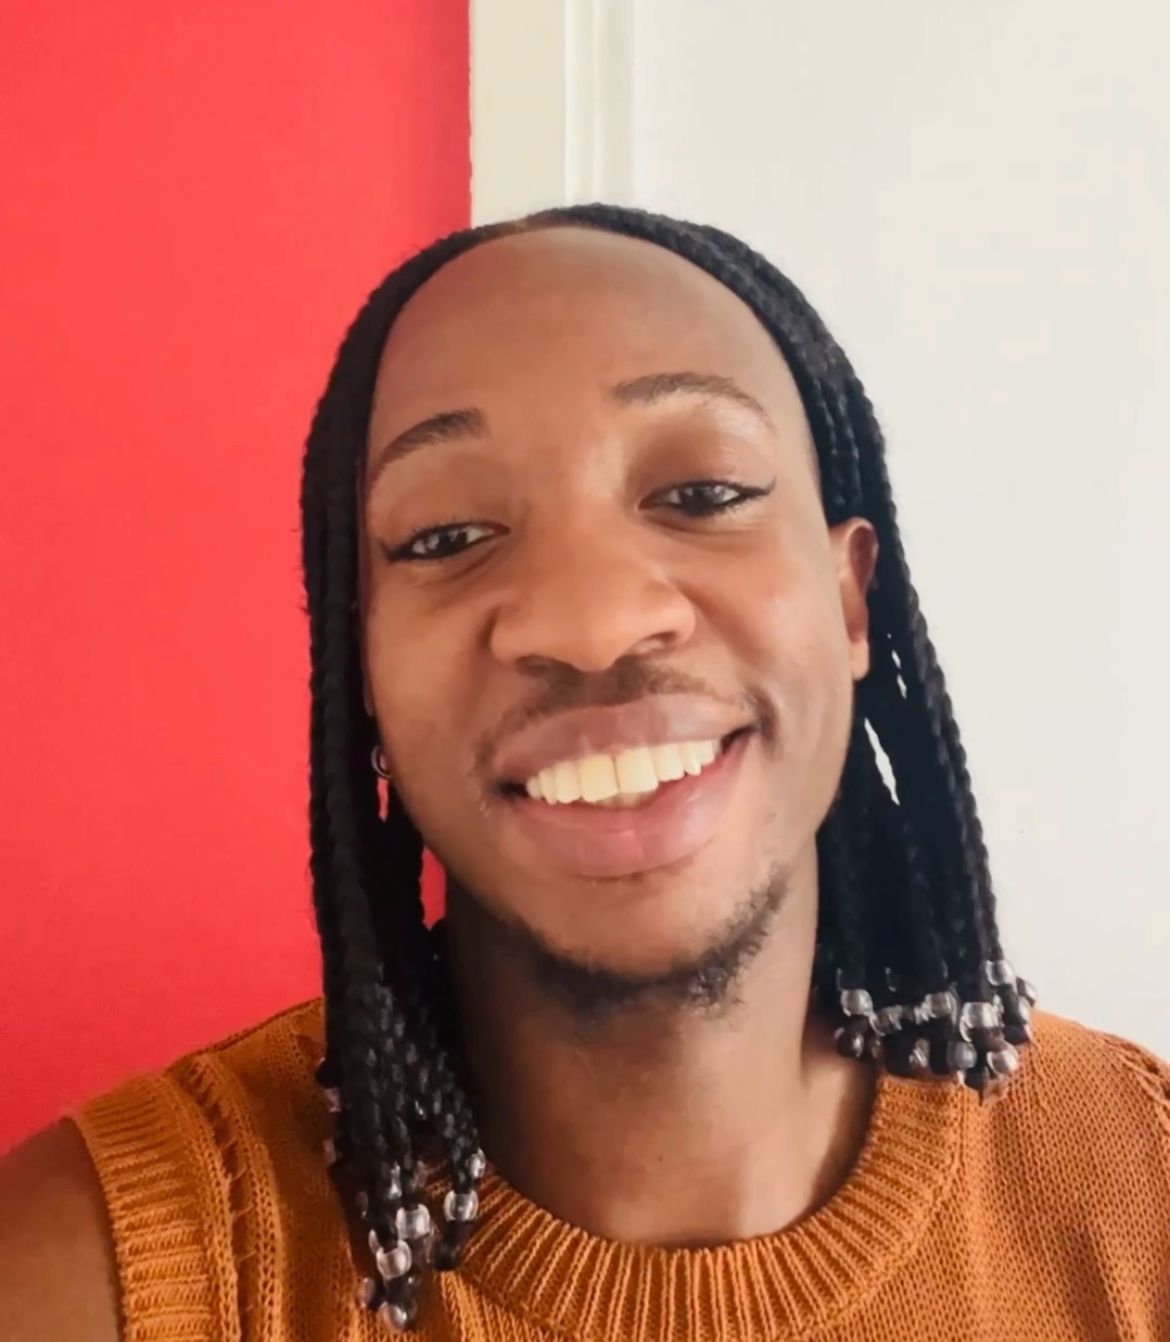 a selfie of An0maly smiling against a red and white background. He has his hair in shoulder length braids and wearing an orange sweater vest.